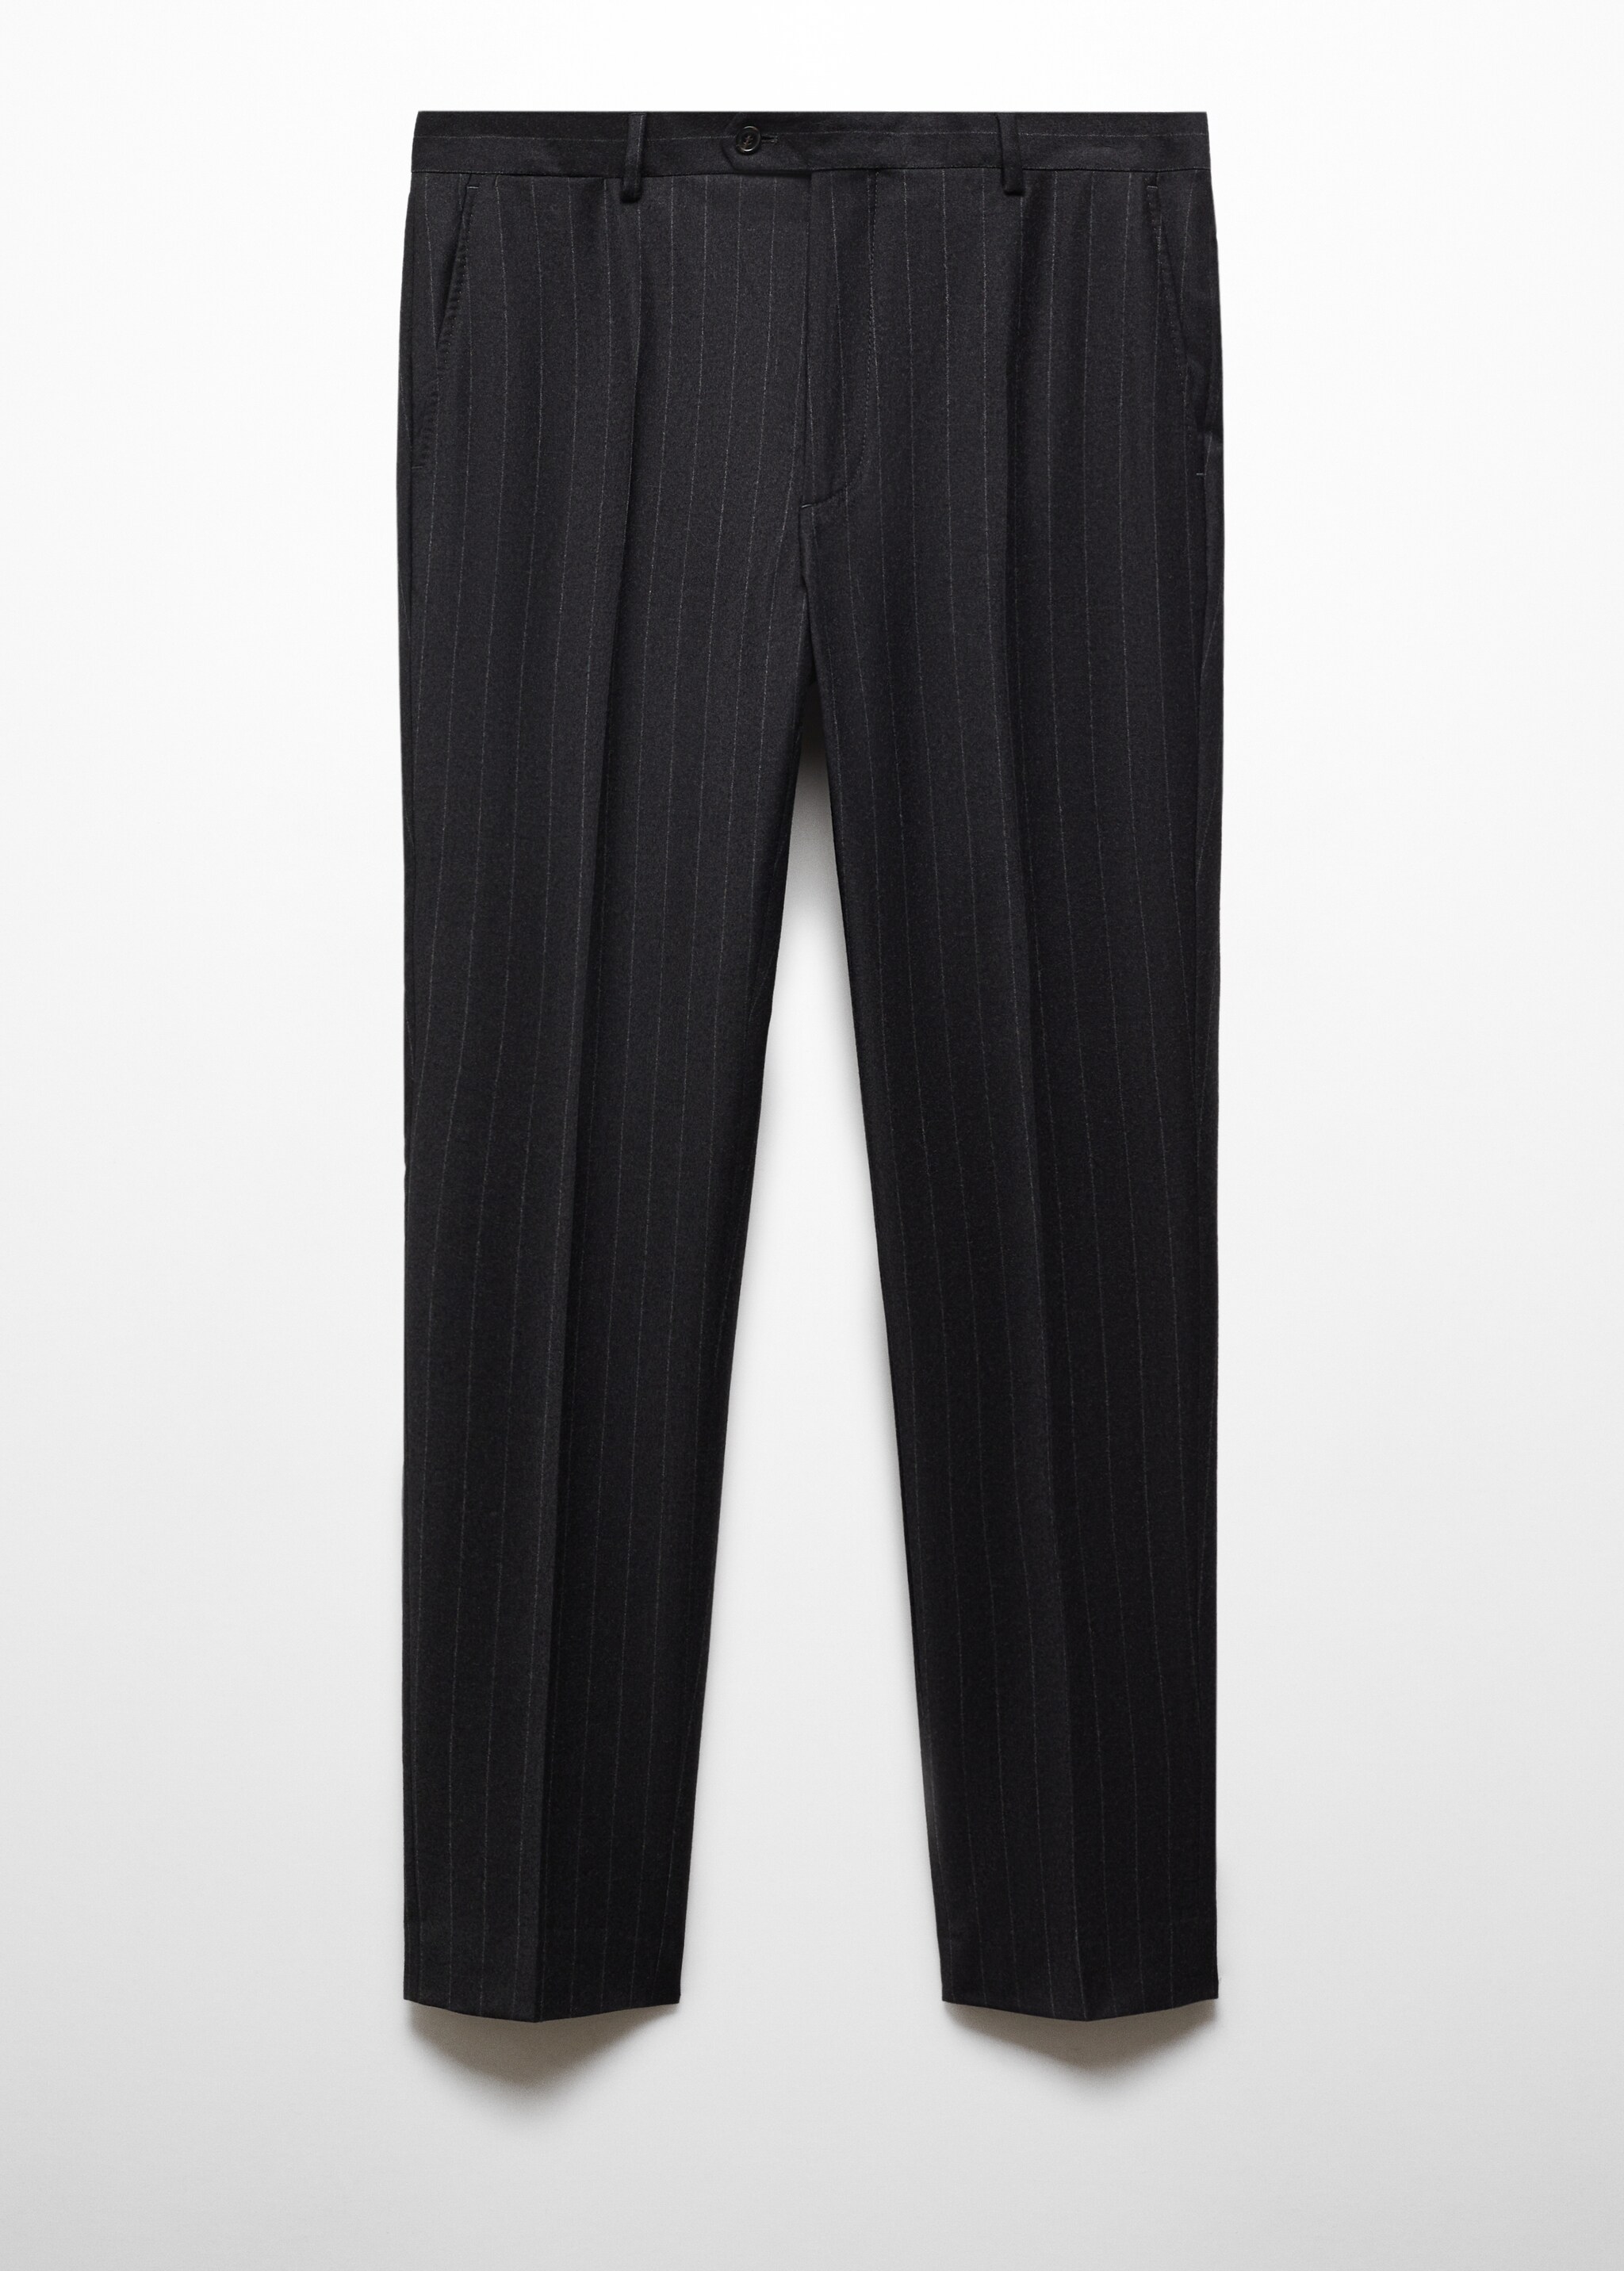 Virgin wool suit trousers - Article without model